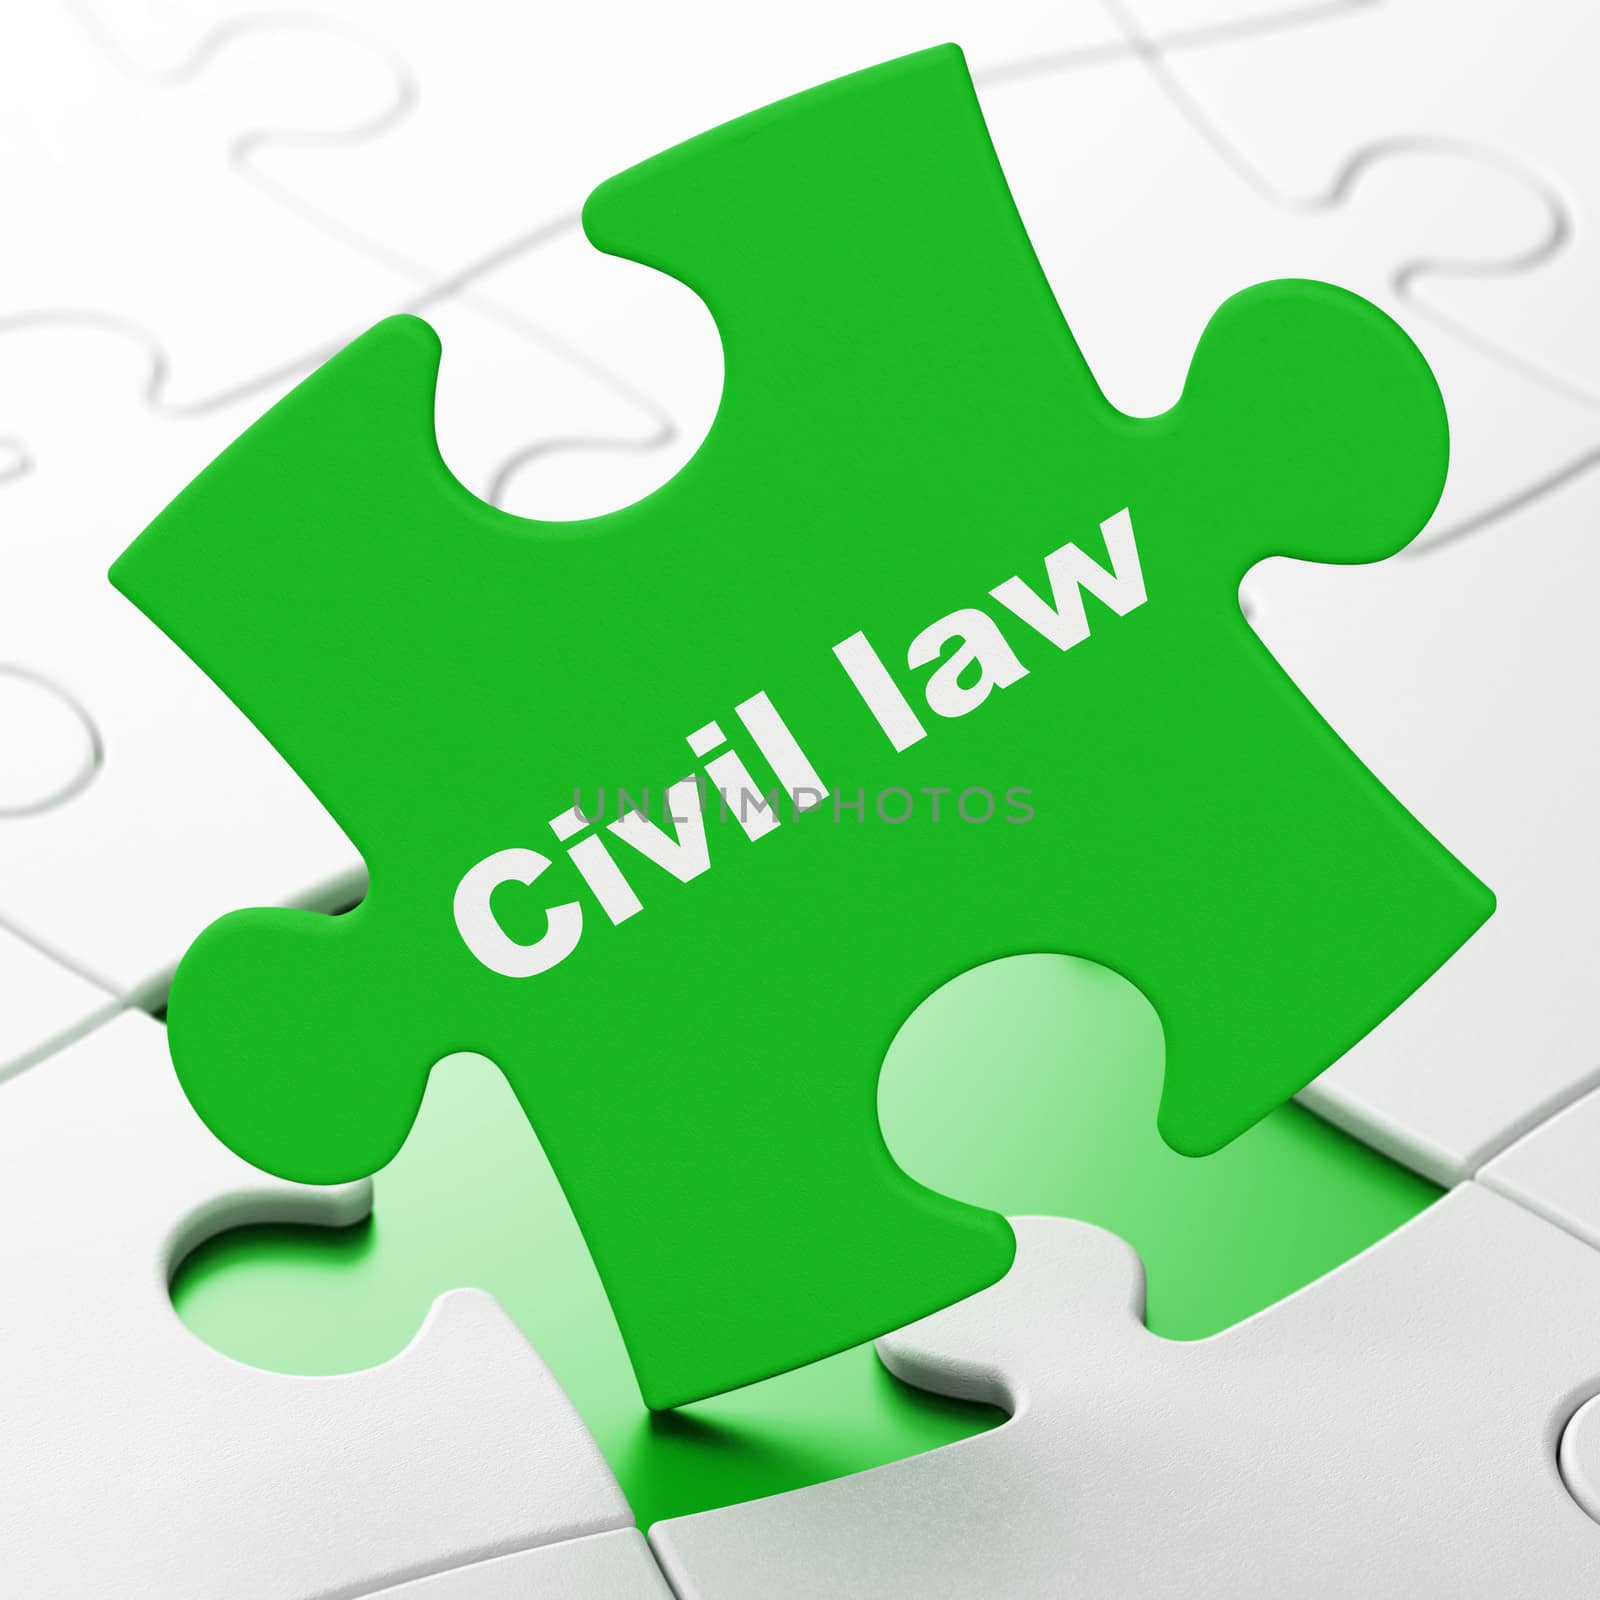 Law concept: Civil Law on puzzle background by maxkabakov